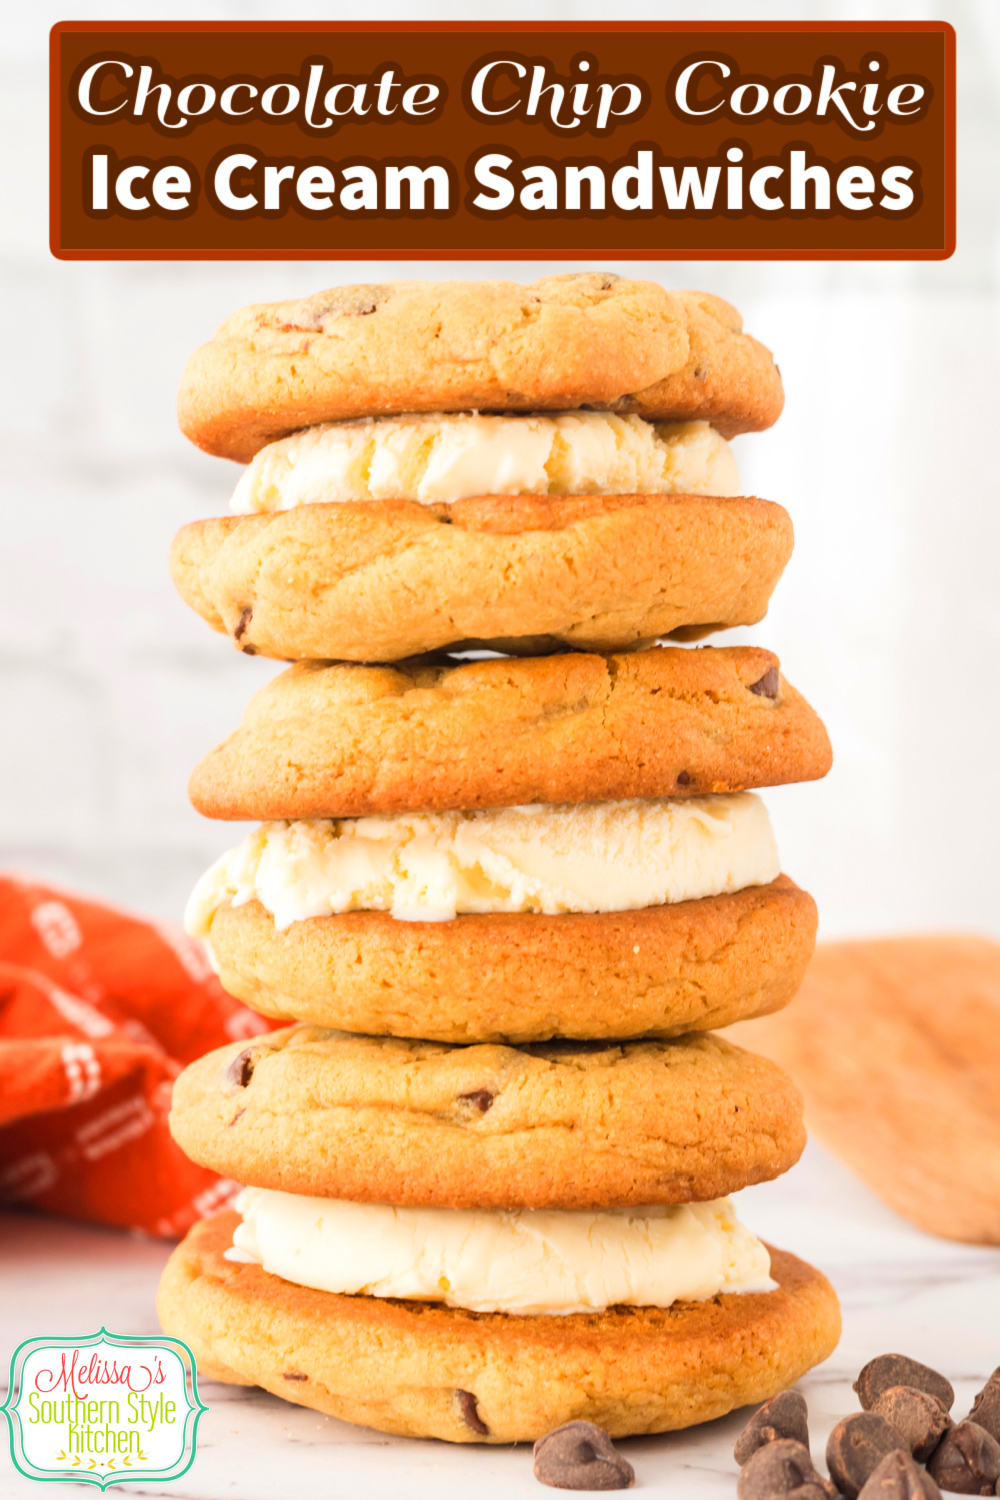 These yummy Cookie Ice Cream Sandwiches feature scratch made chocolate chip cookies sandwiched together with creamy vanilla ice cream. #icecream #icecreamsandwiches #chocolatechipcookies #sandwichcookies #cookies #cookierecipes